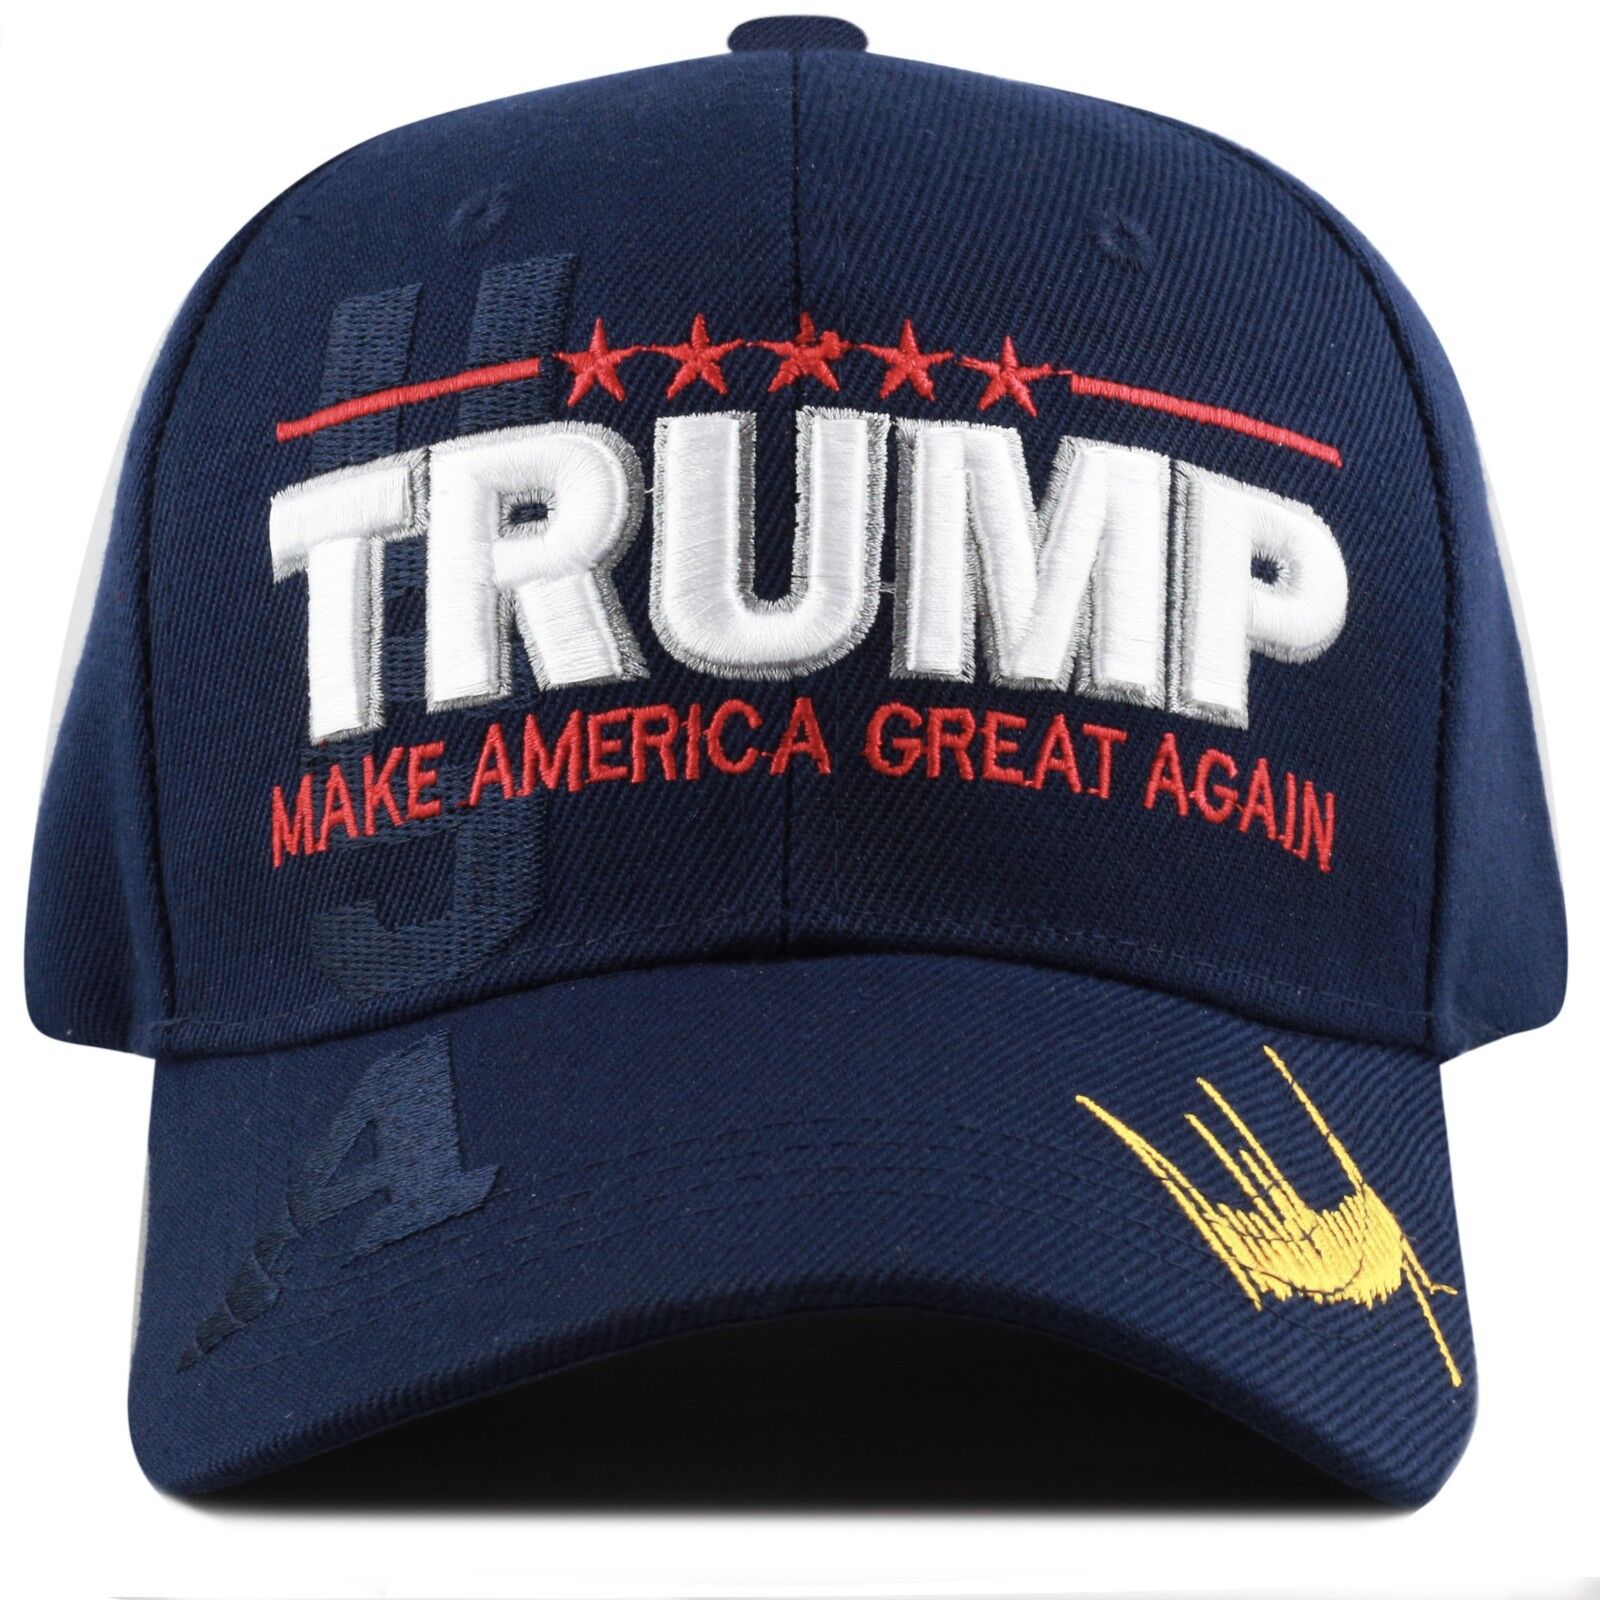 The Hat Depot Exclusive Trump Hat  Make America Great Again-Navy